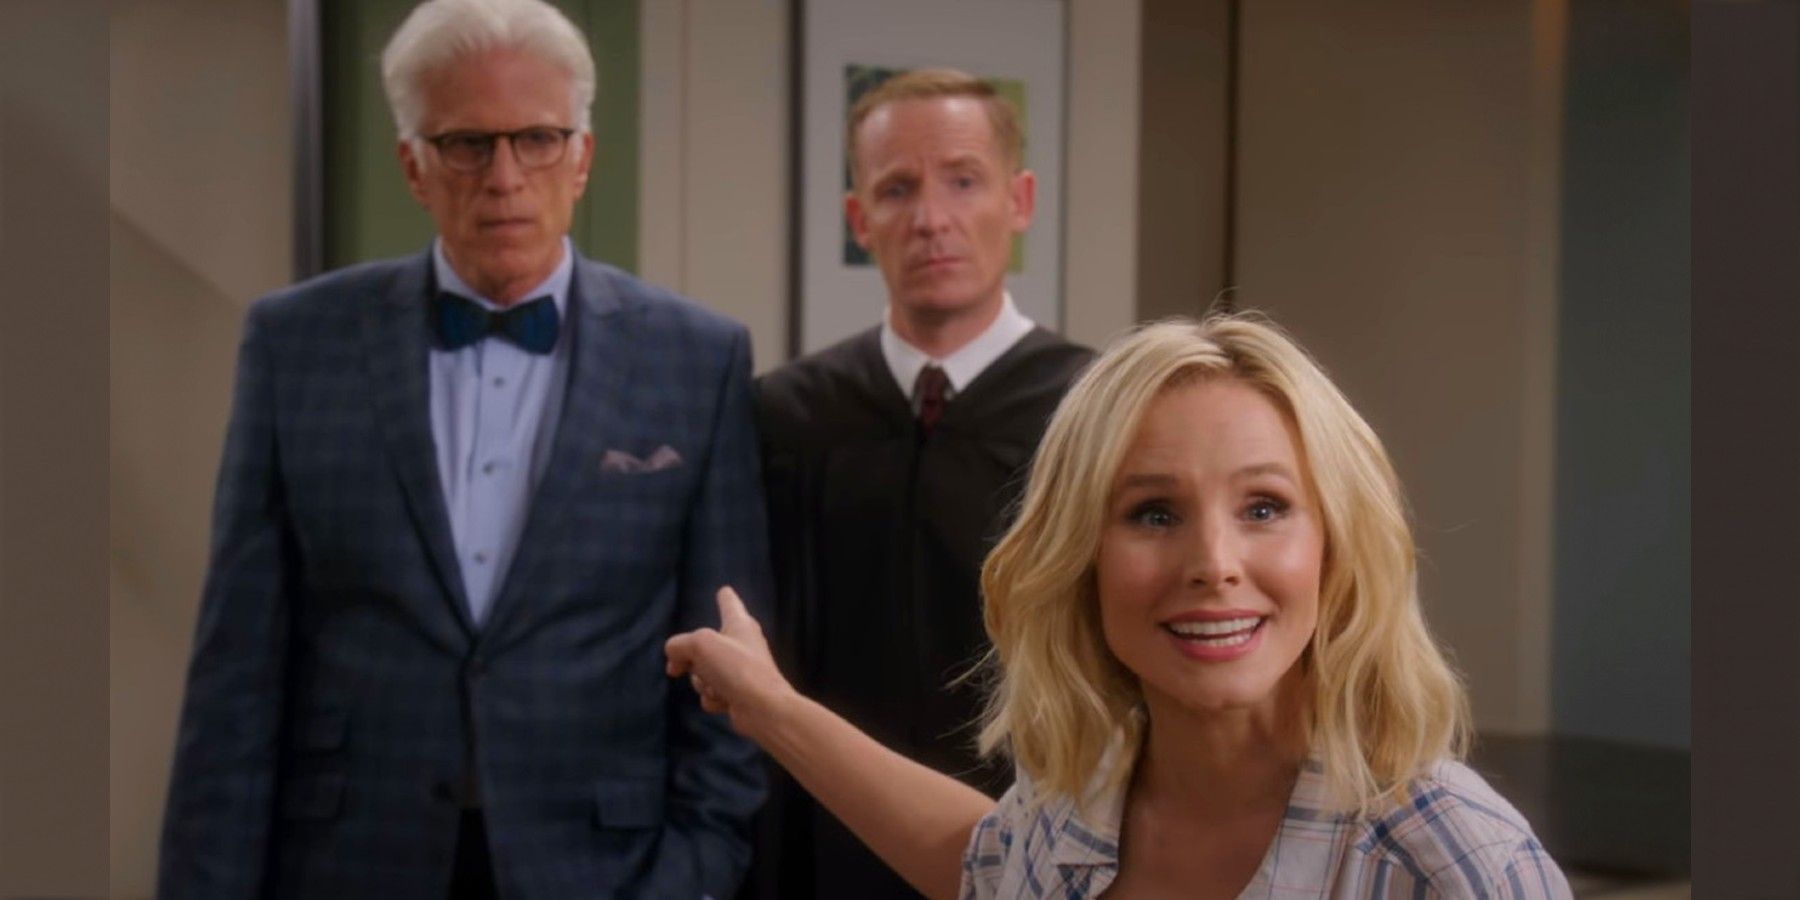 Eleanor pointing out "This is the bad place!" to Michael and Shawn in The Good Place "Michael's Gambit"